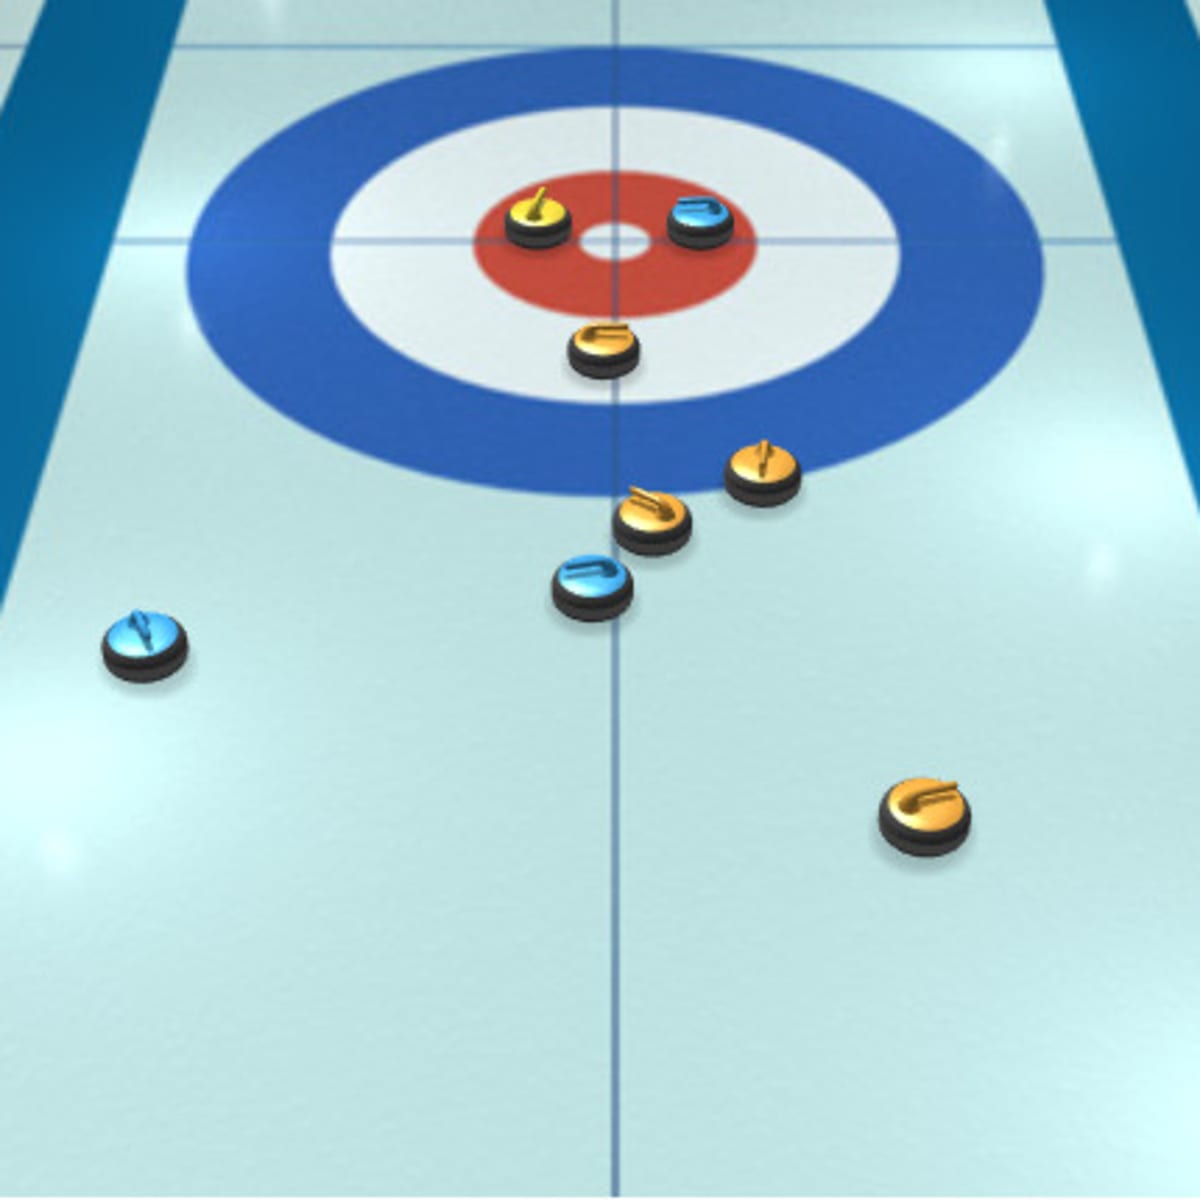 The Best Online Curling App Doesnt Really Have a Name